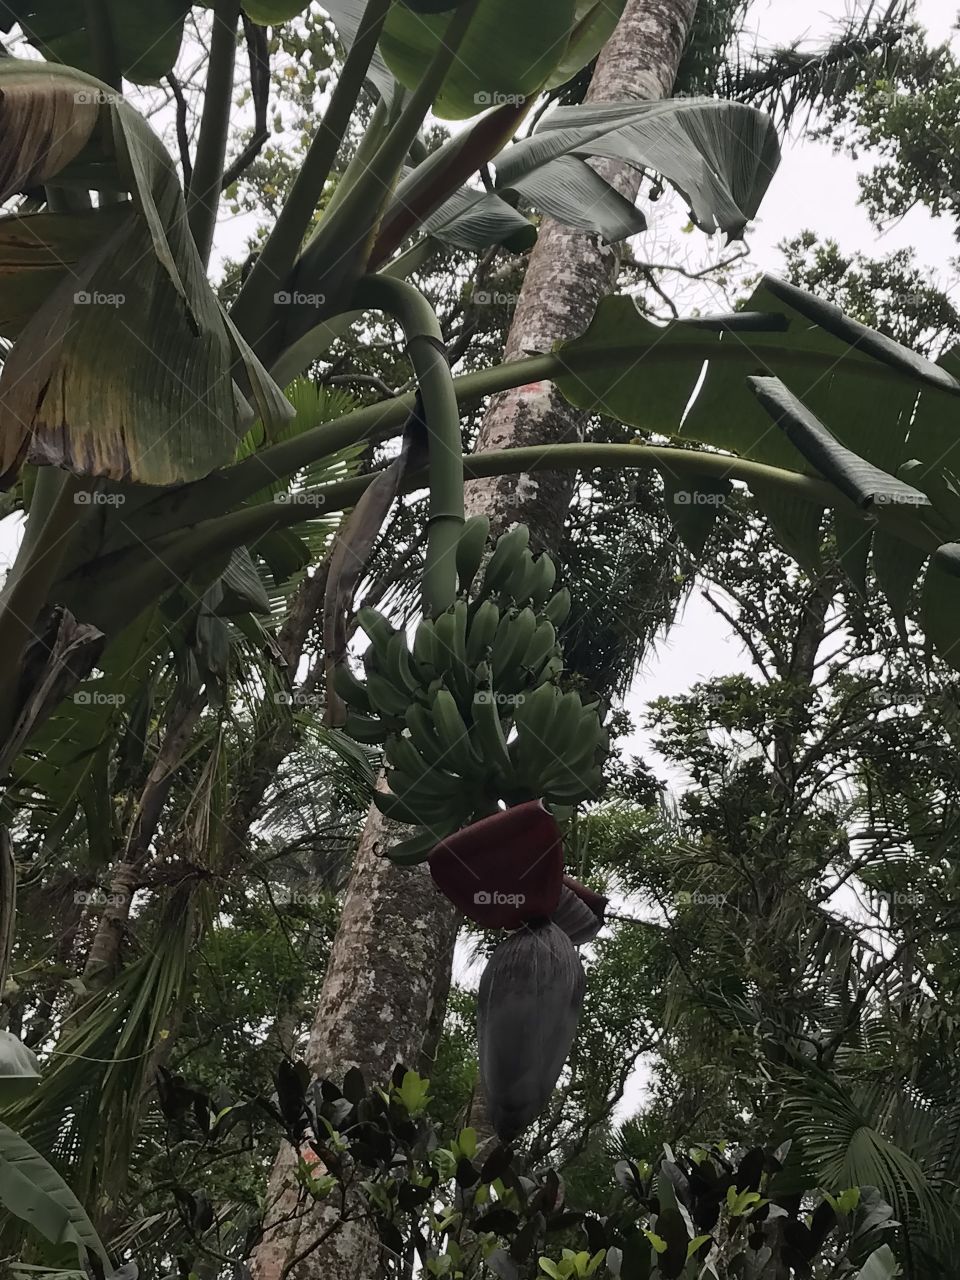 Picture of a bunch of plantains growing in the Dominican Republic. 